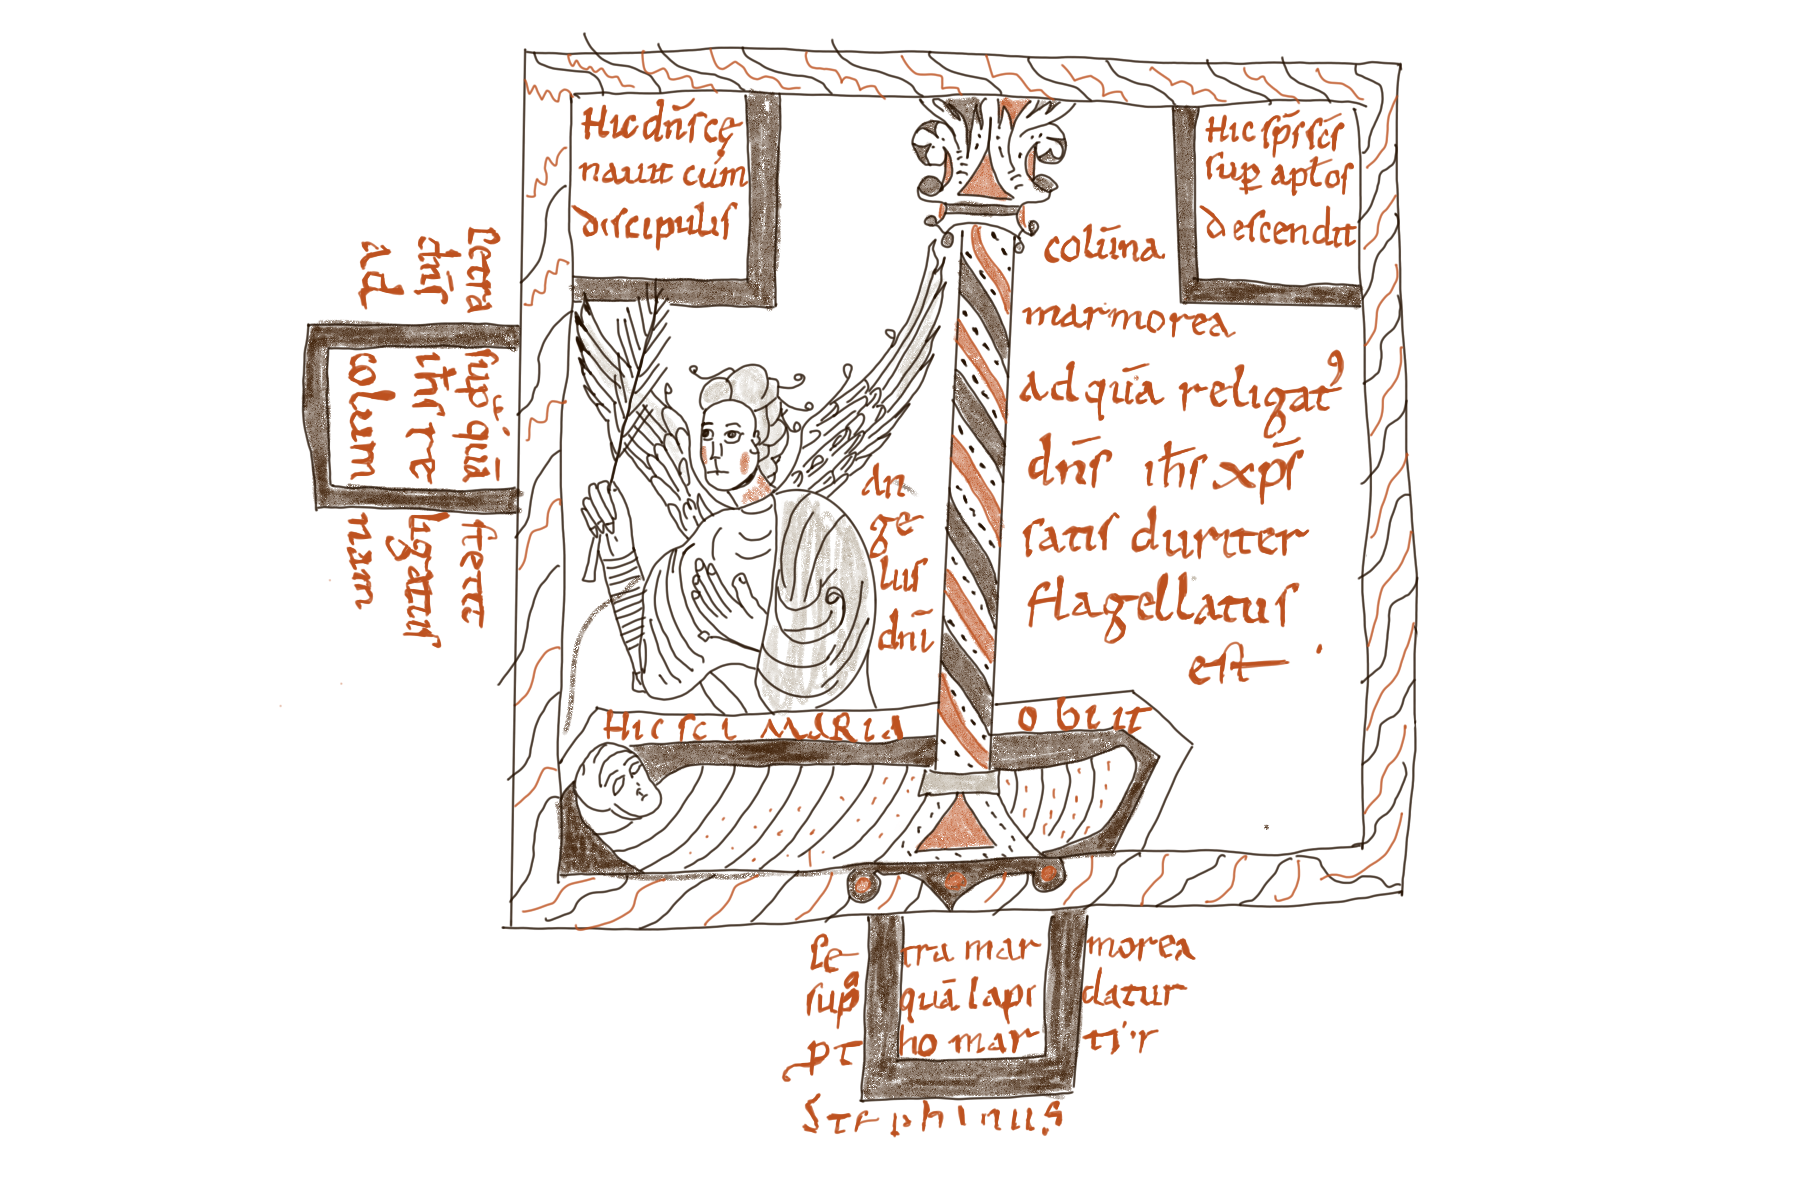 Reproduction of the plan of the site of the Flagellation (from Ms N)